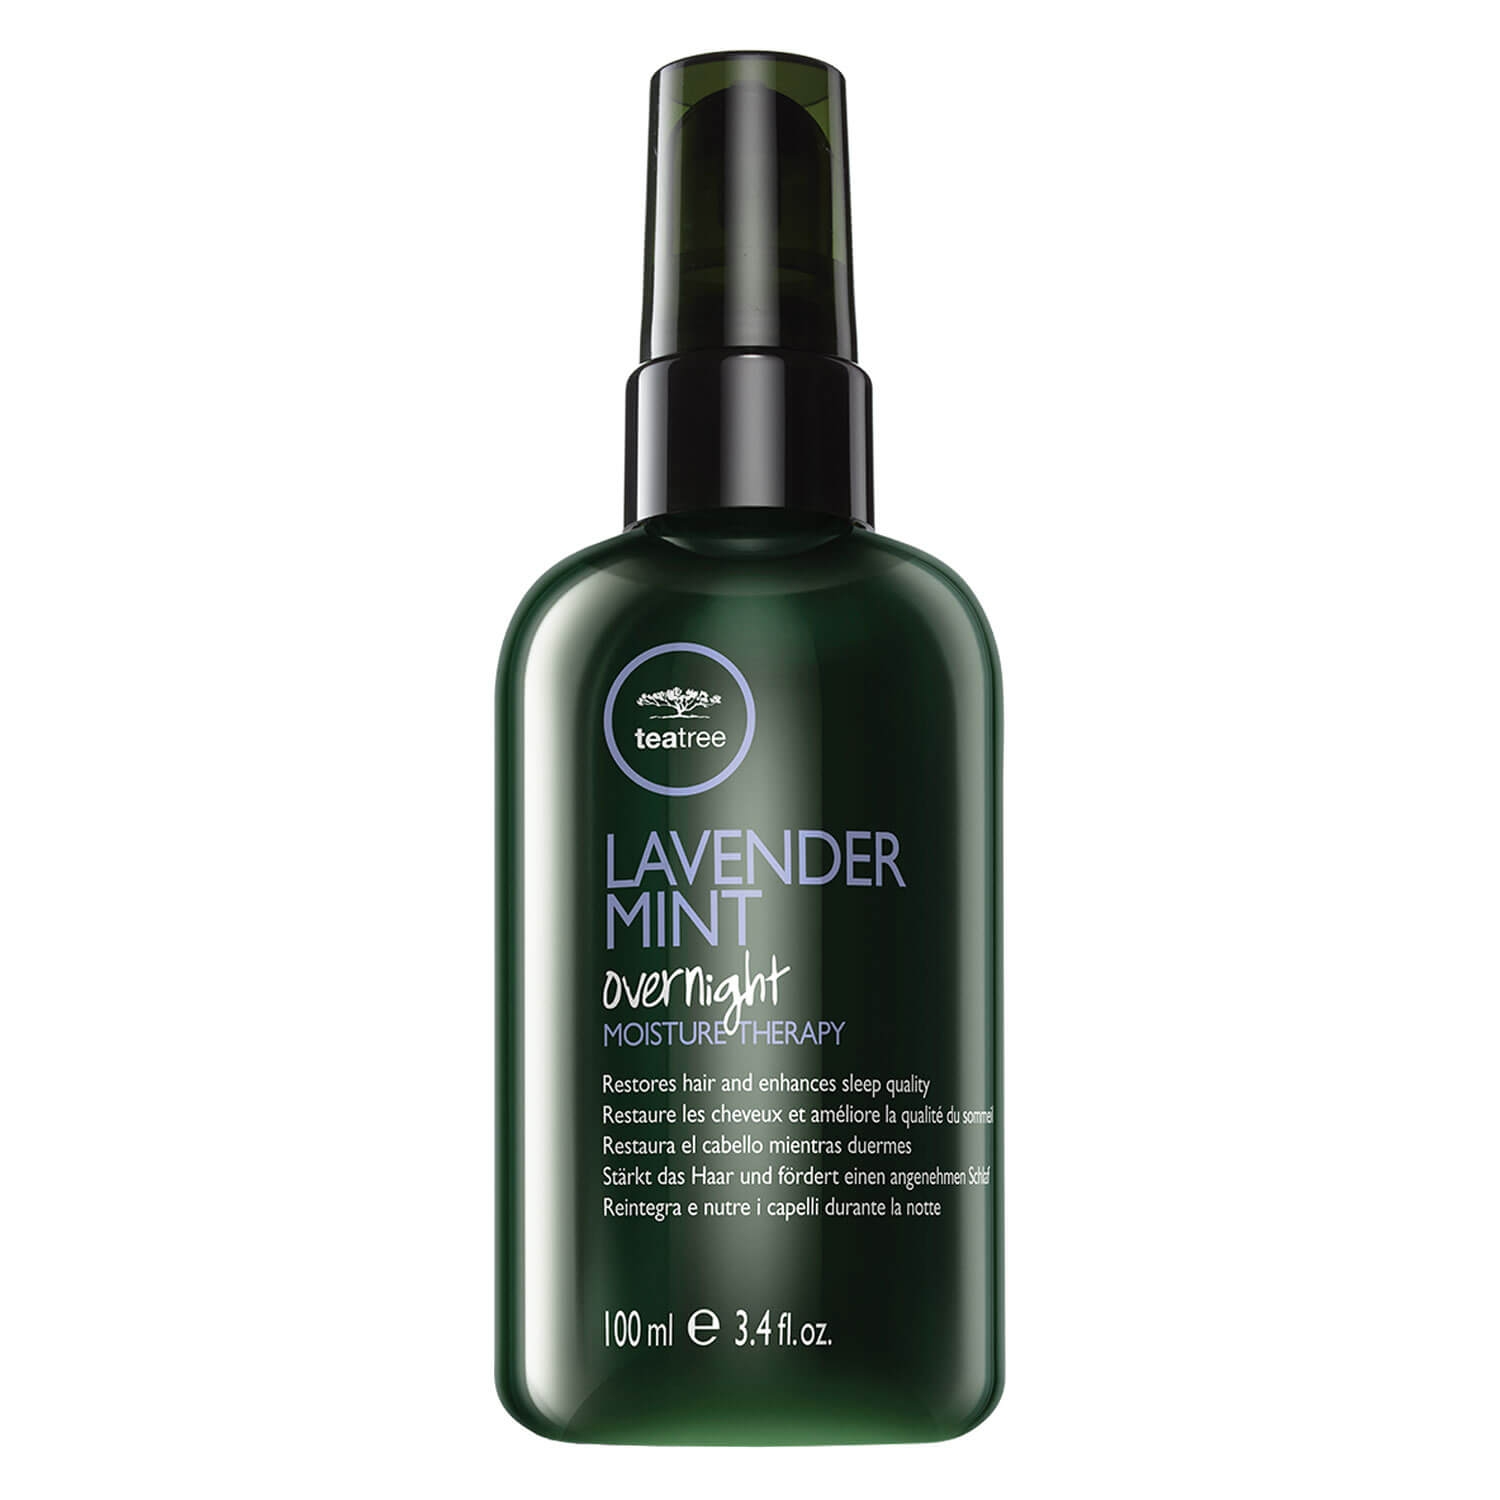 Product image from Tea Tree Lavender Mint - Overnight Moisture Therapy